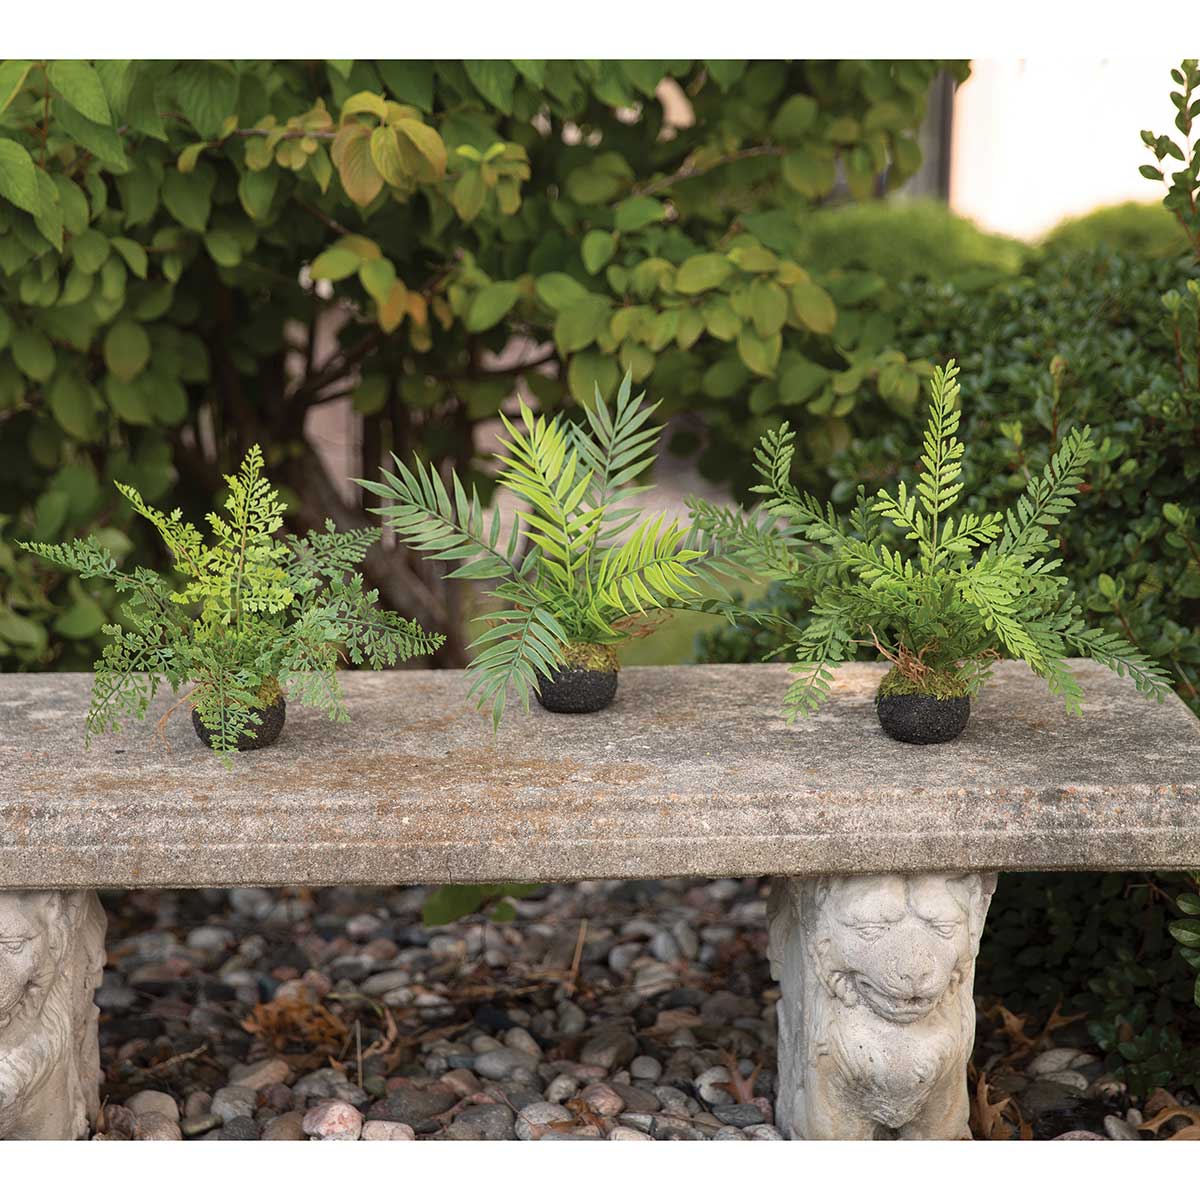 FERN PATIO ON DIRT WITH ROOTS 15IN X 11IN GREEN - Click Image to Close